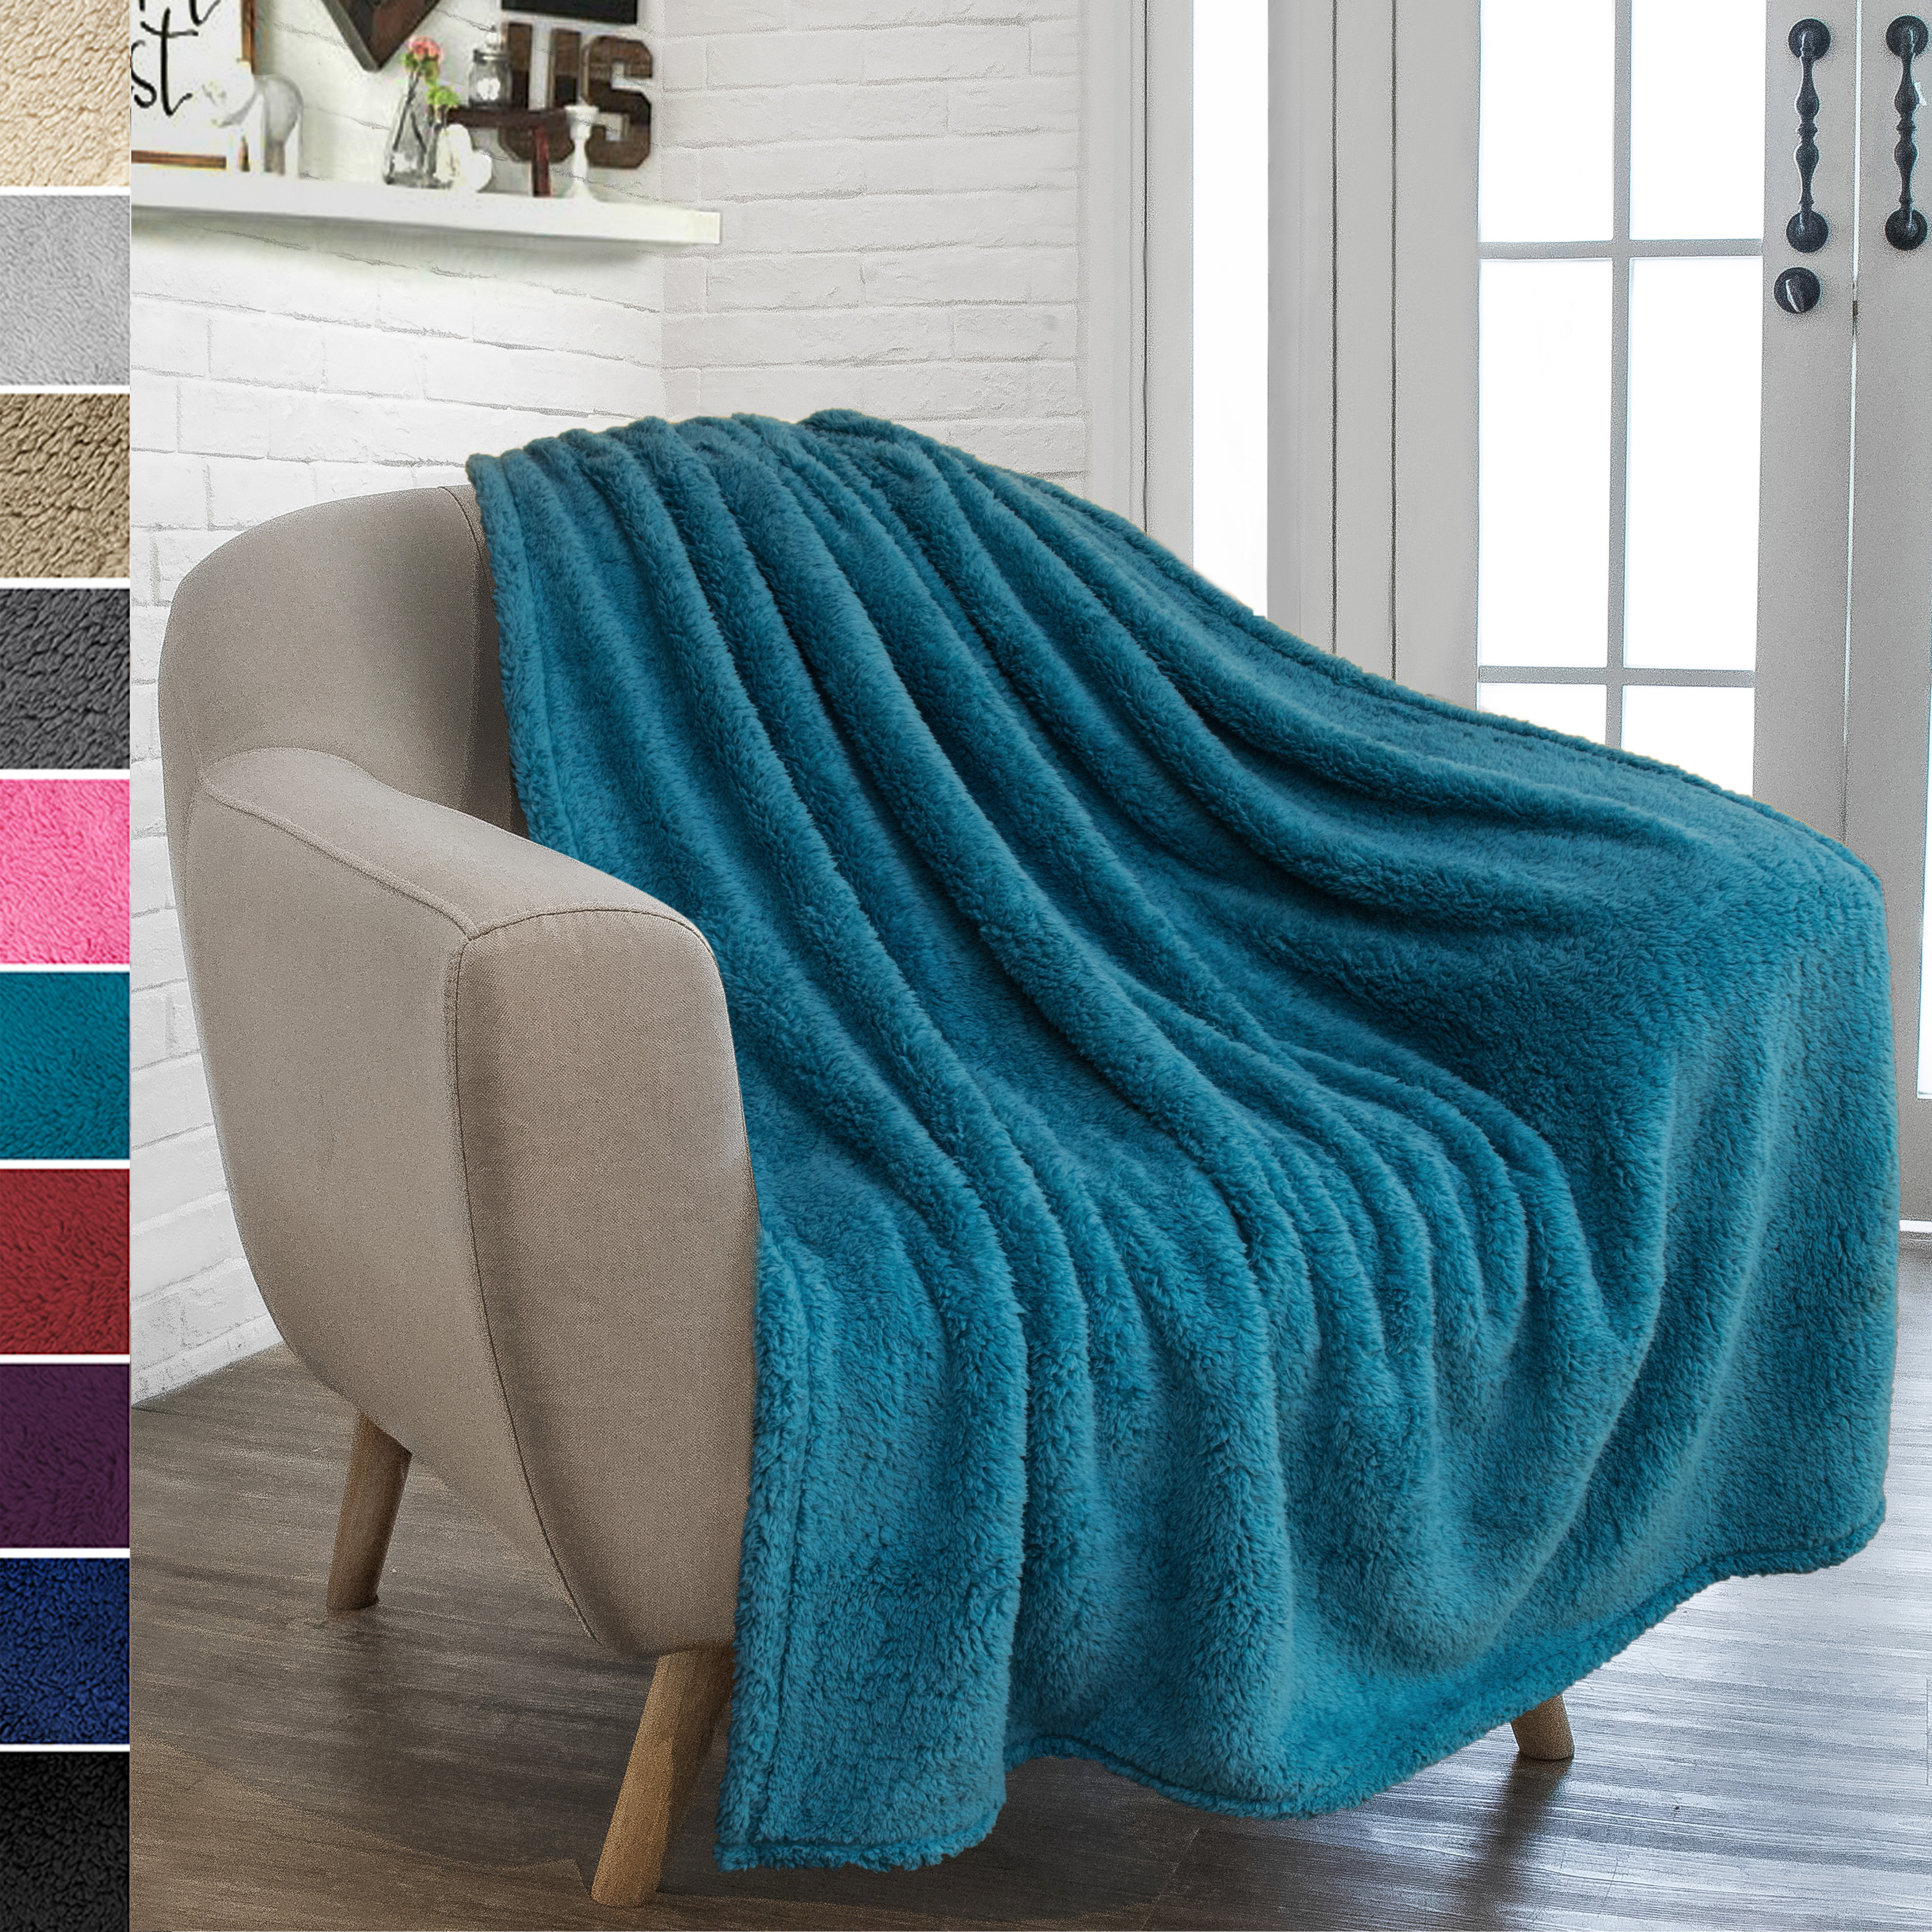 Zadaling Sherpa Fleece Blanket Throws,You are My Sunshine Art Quotes Soft Bed Blanket Cozy Luxury Blanket 60x80,Fuzzy Thick Reversible Warm Fluffy Microfiber Plush Throw Blanket for Couch Bed Sofa 